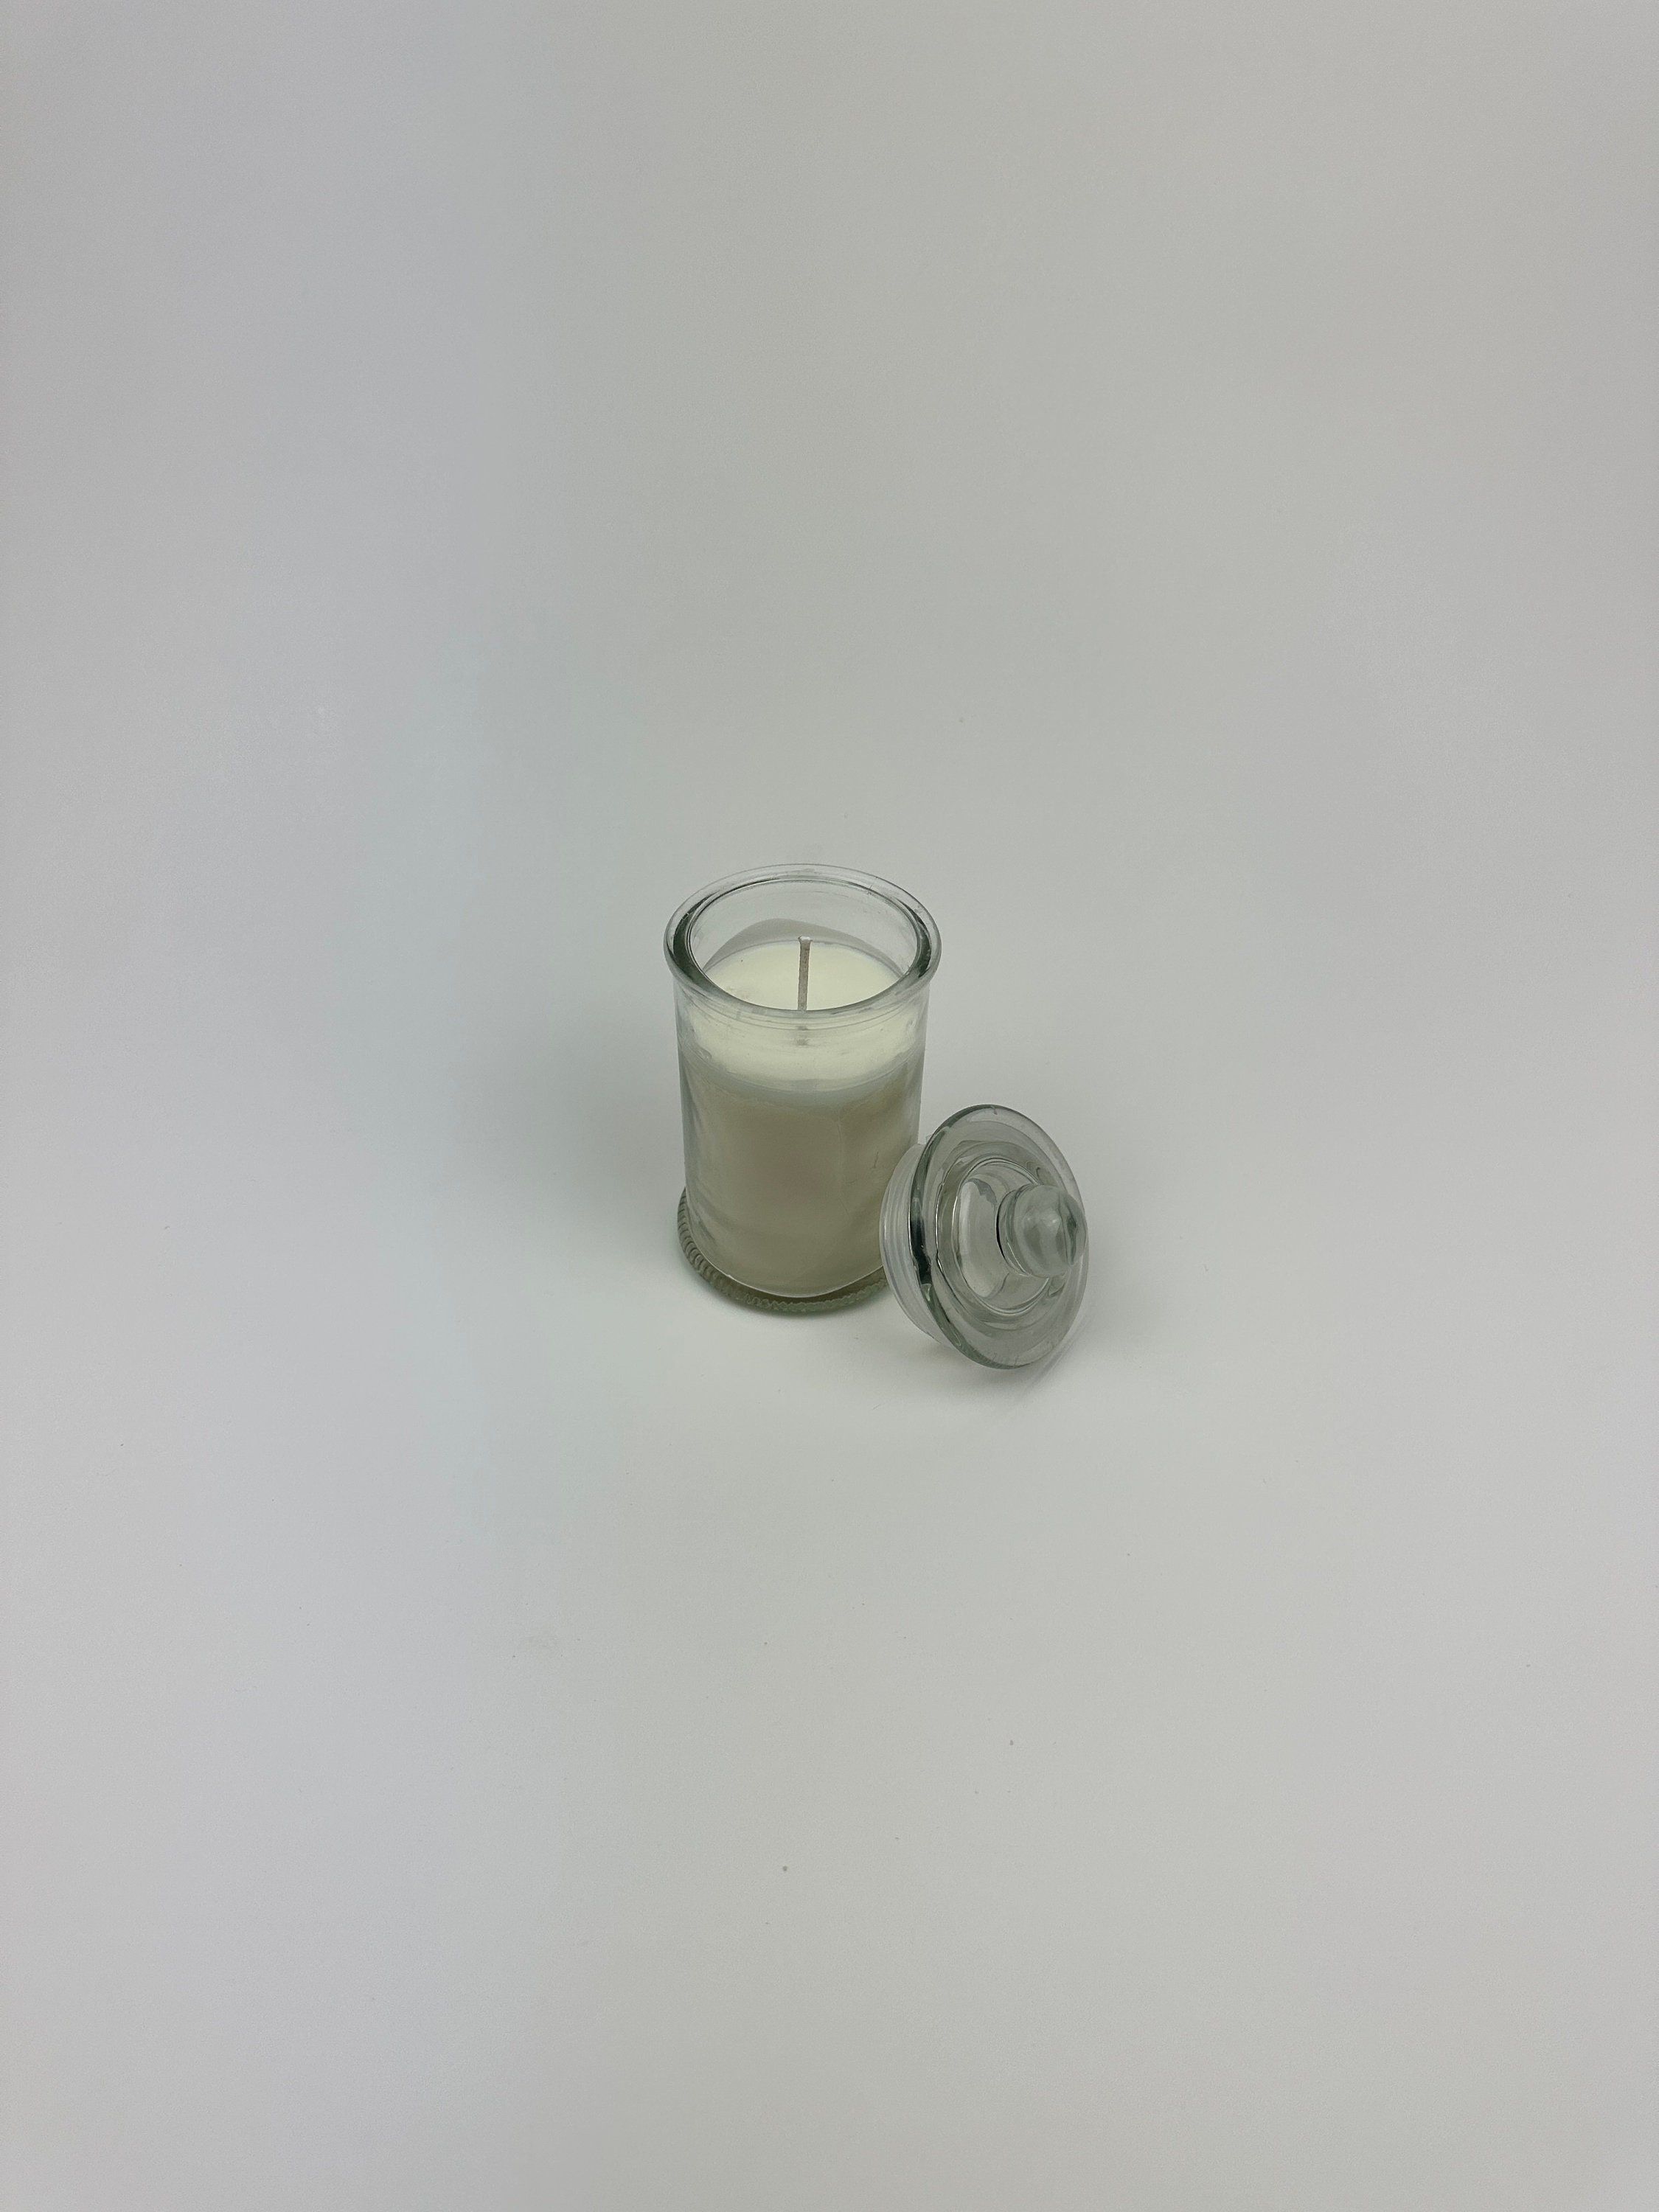 30 Ply Cotton Candle Wicks, Smokeless Wick, Flat Braided, DIY Candle  Making, 50-100-200 Ft. / 15.2-30.5-61 M 